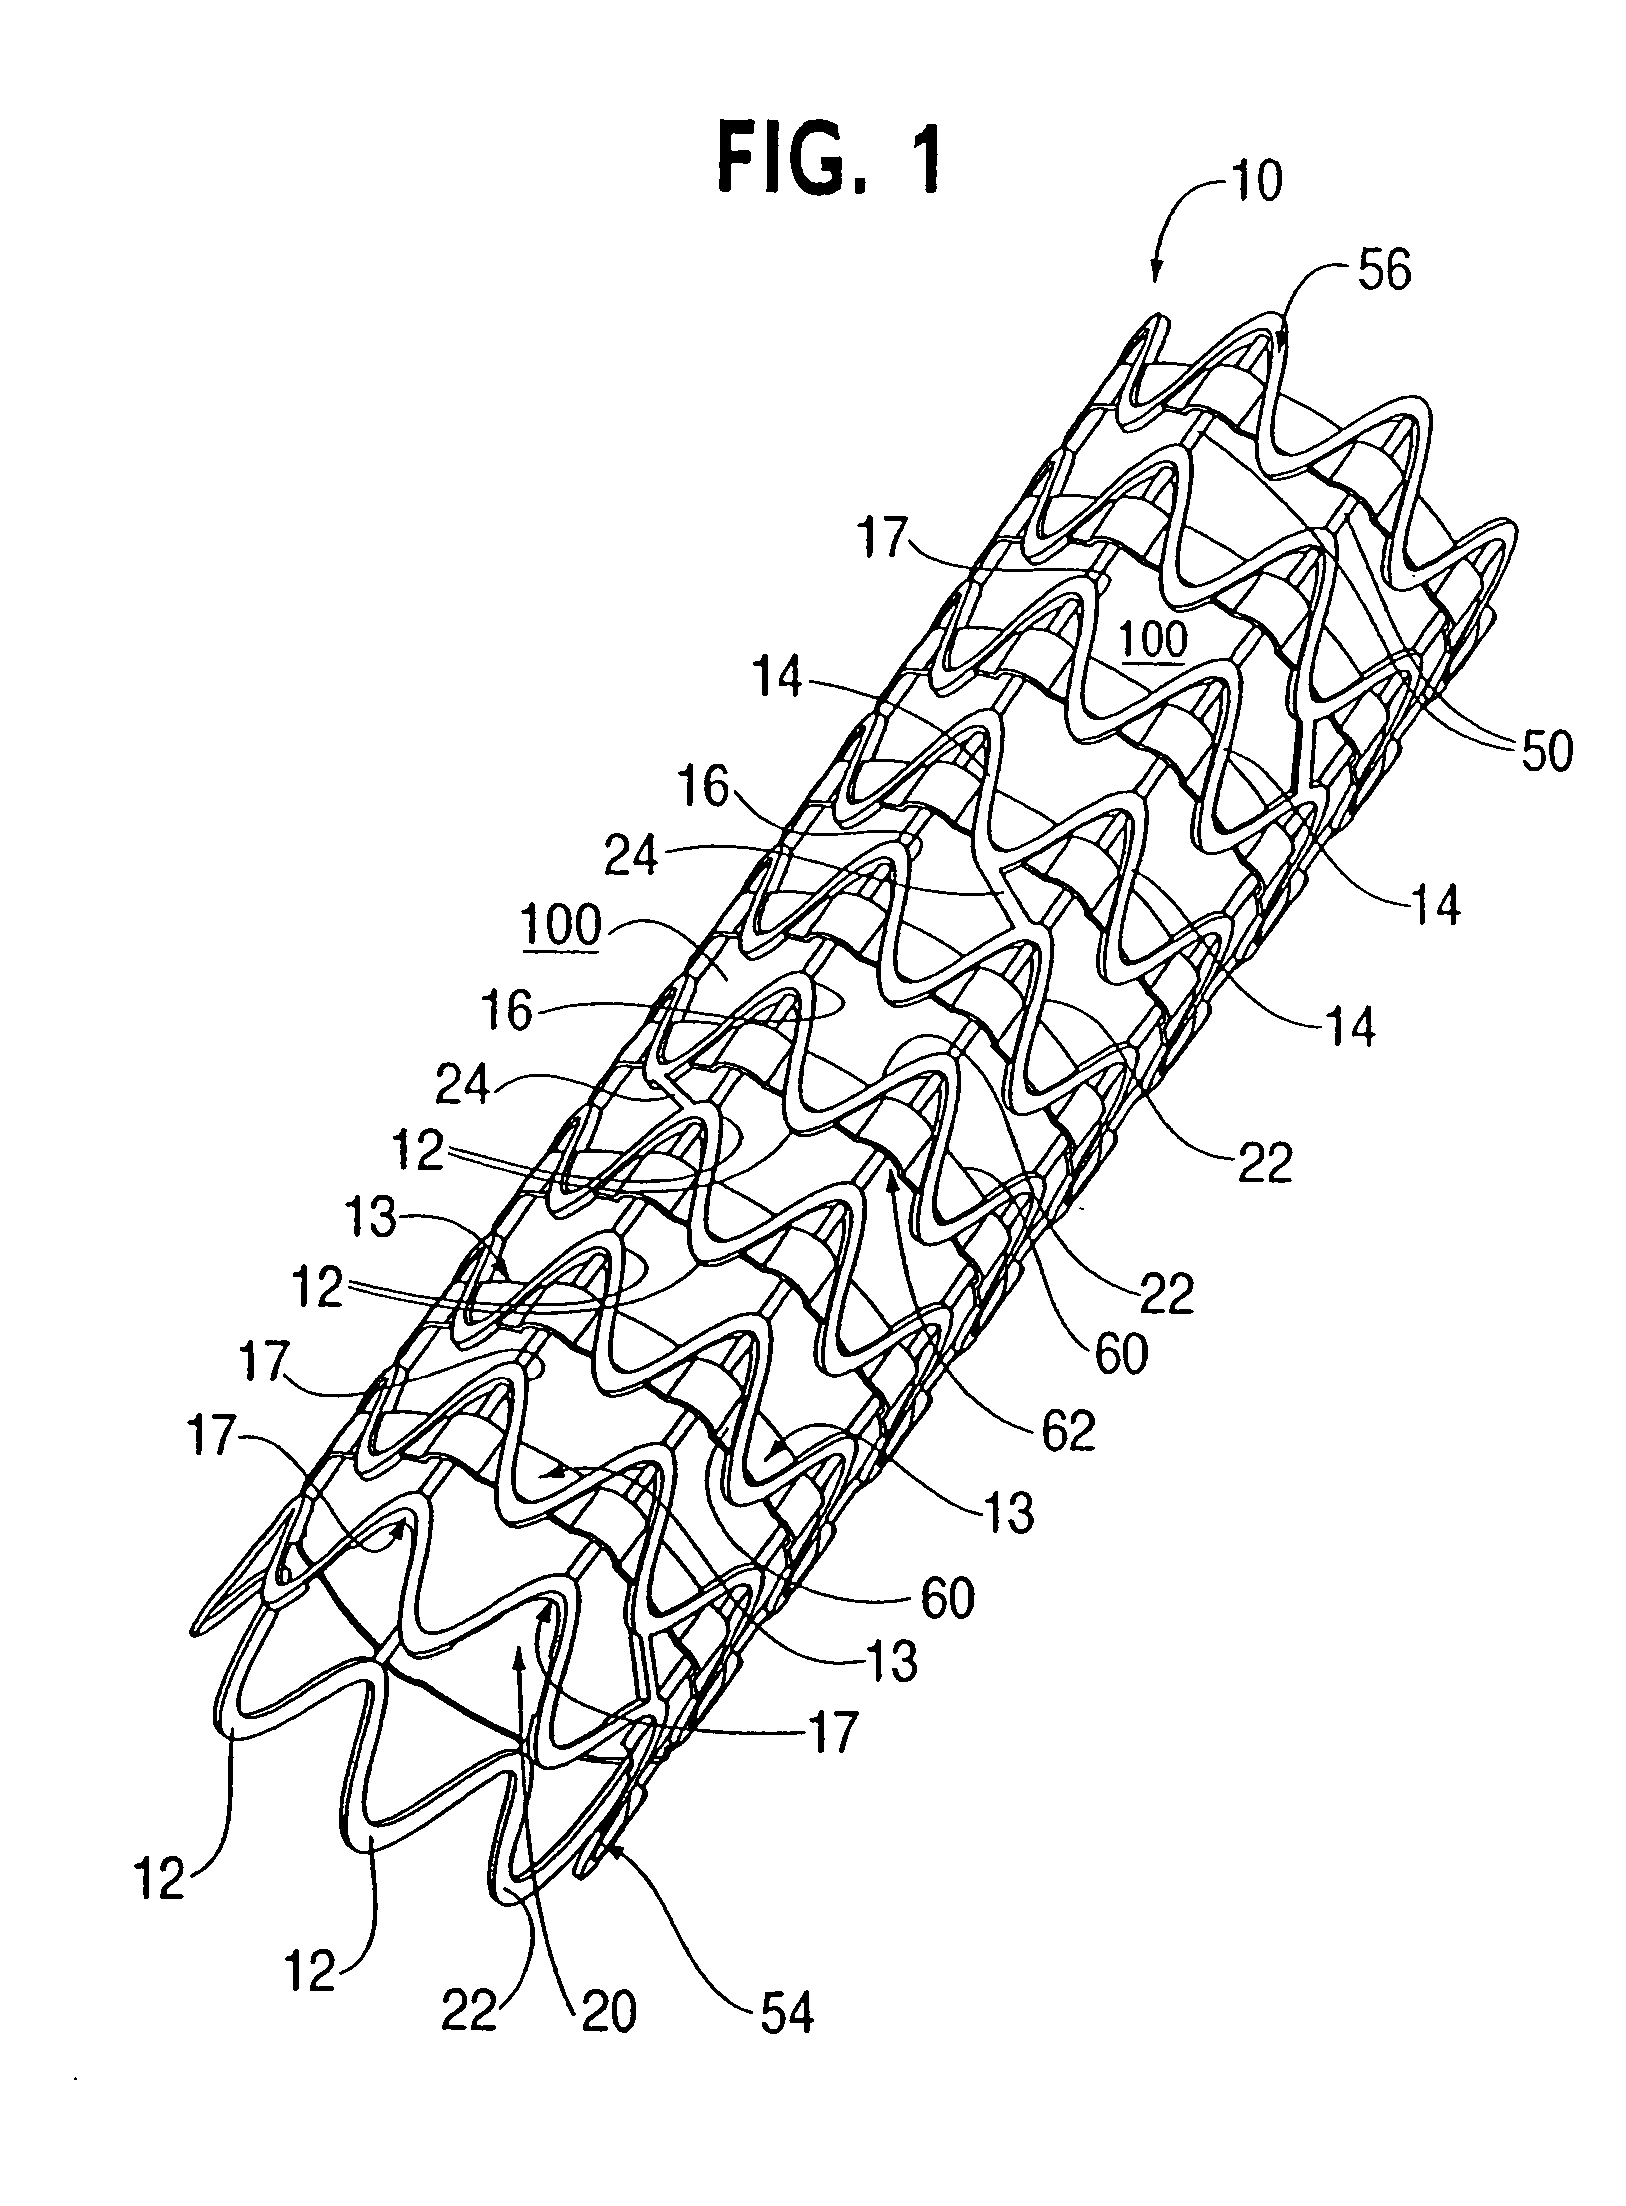 Stent-graft with rails